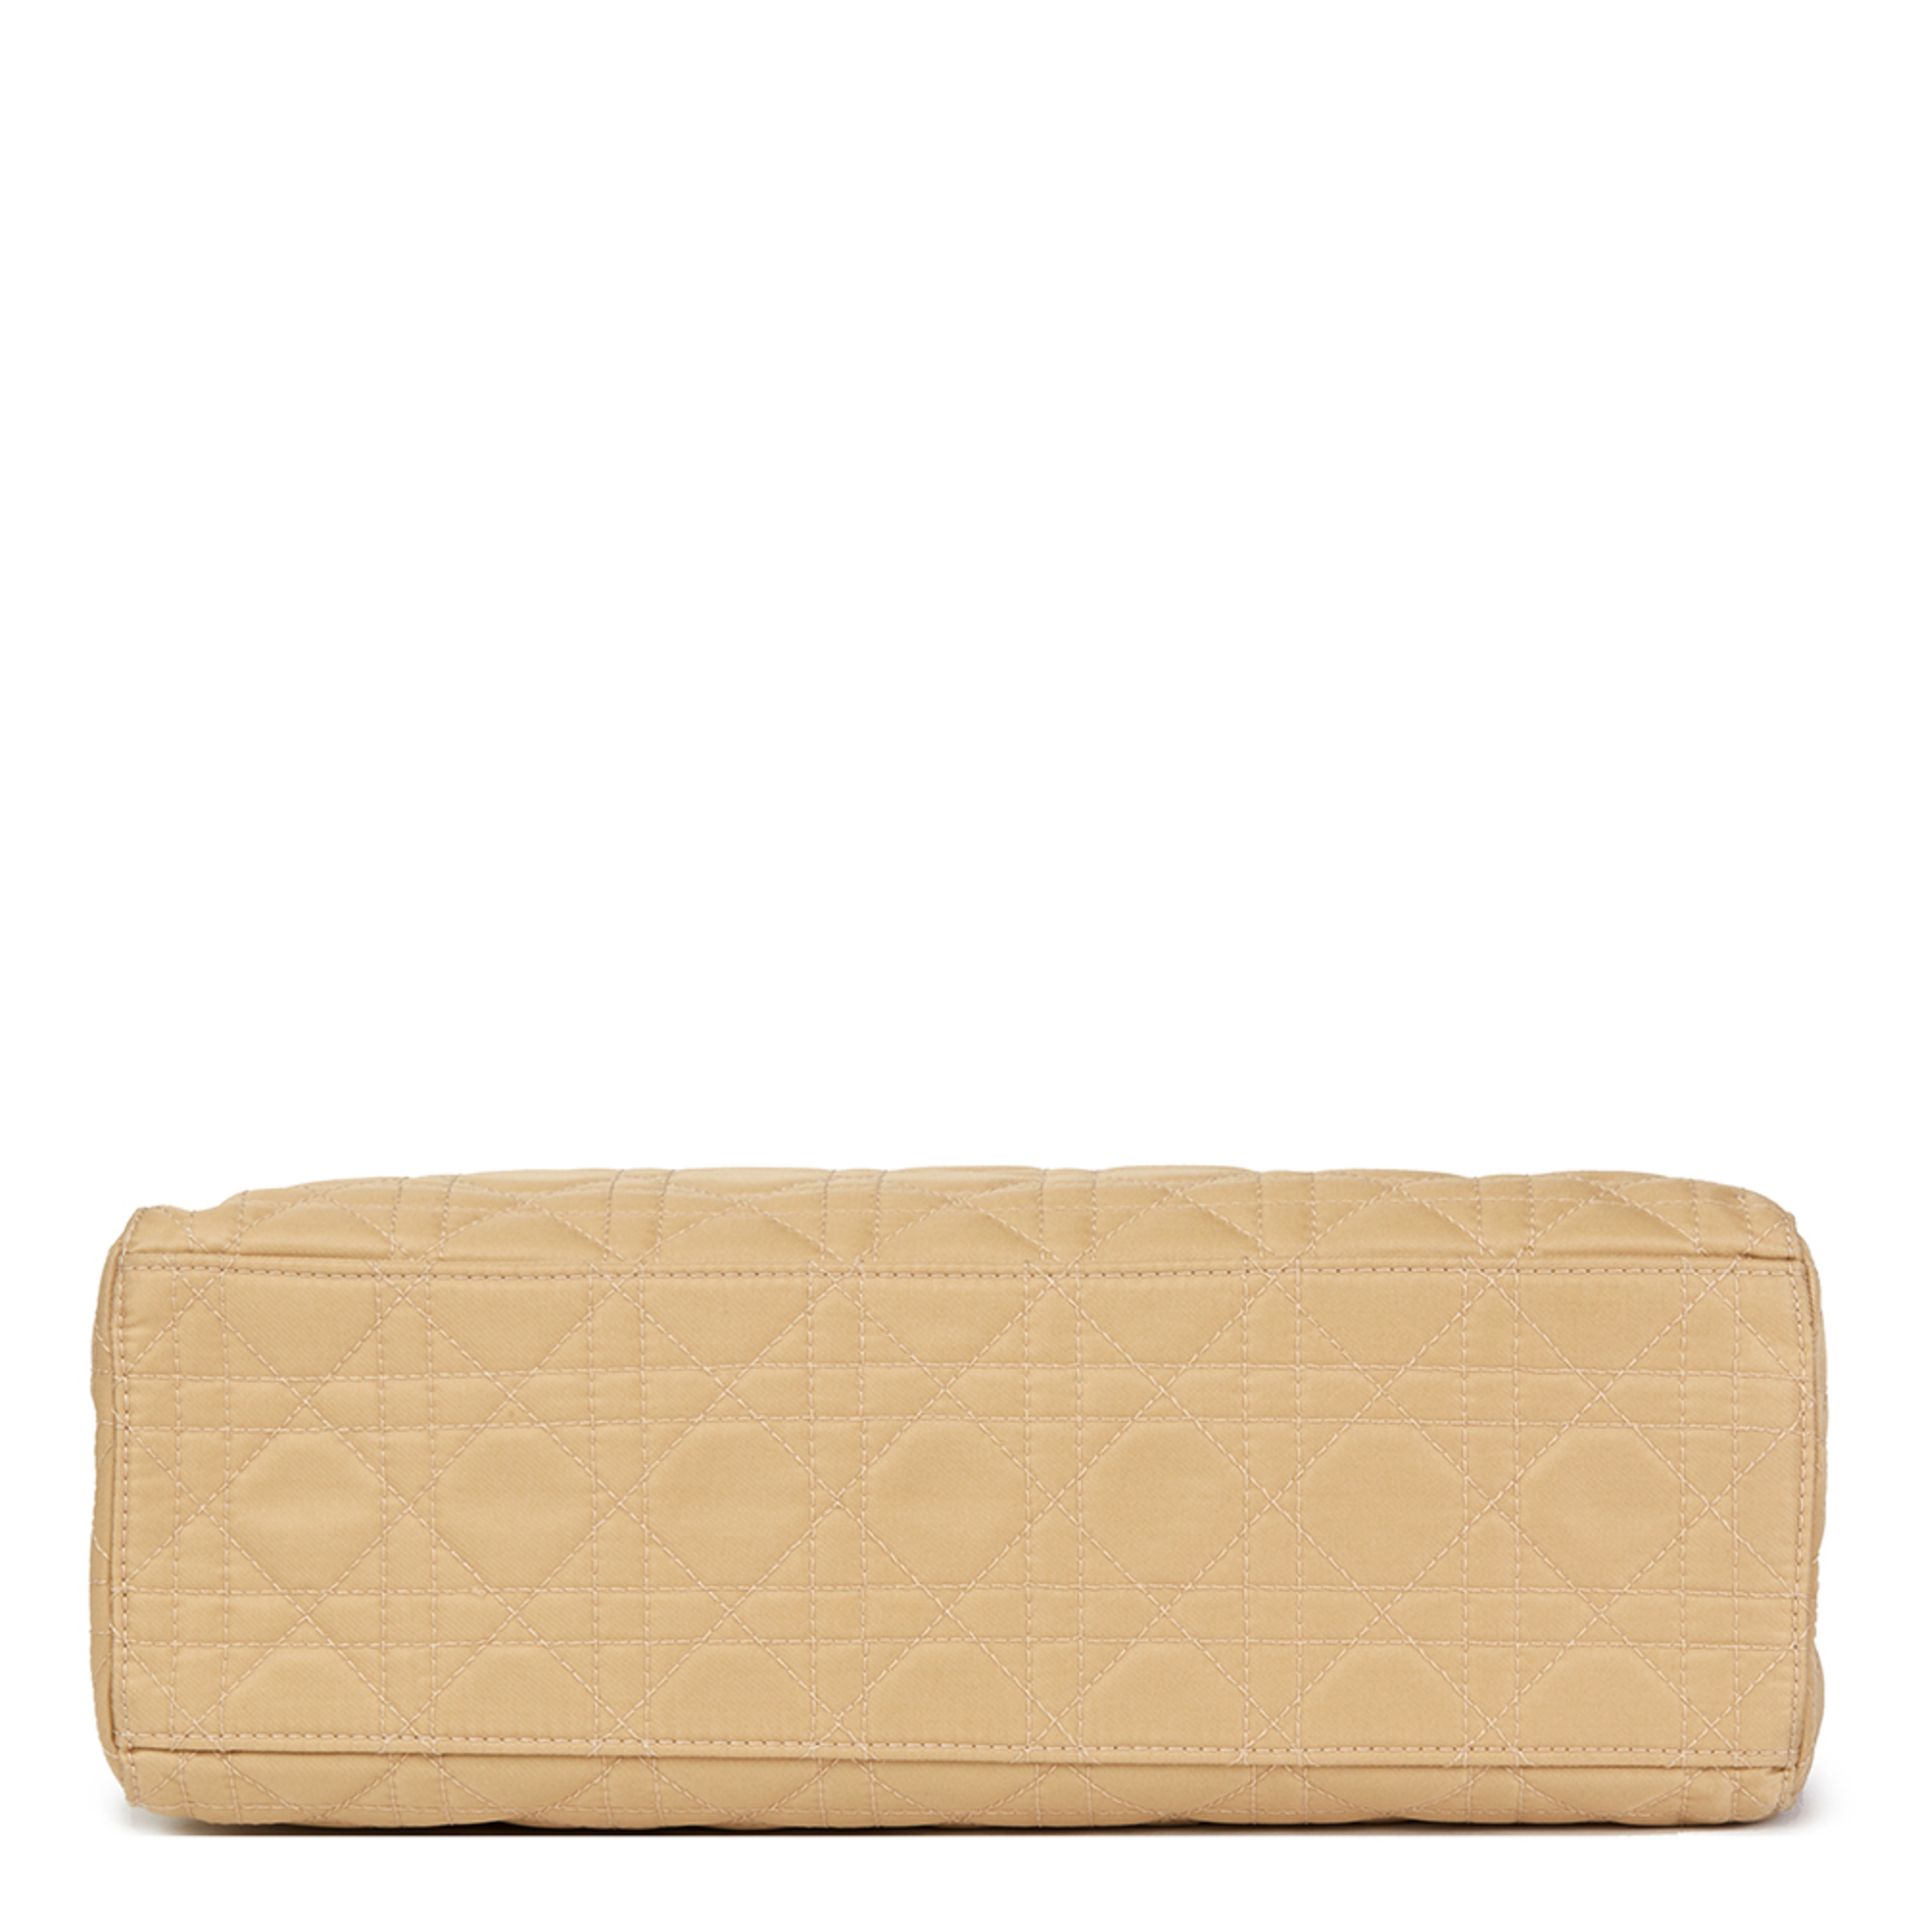 Christian Dior Beige Quilted Satin & Patent Leather Lady Dior GM - Image 5 of 10